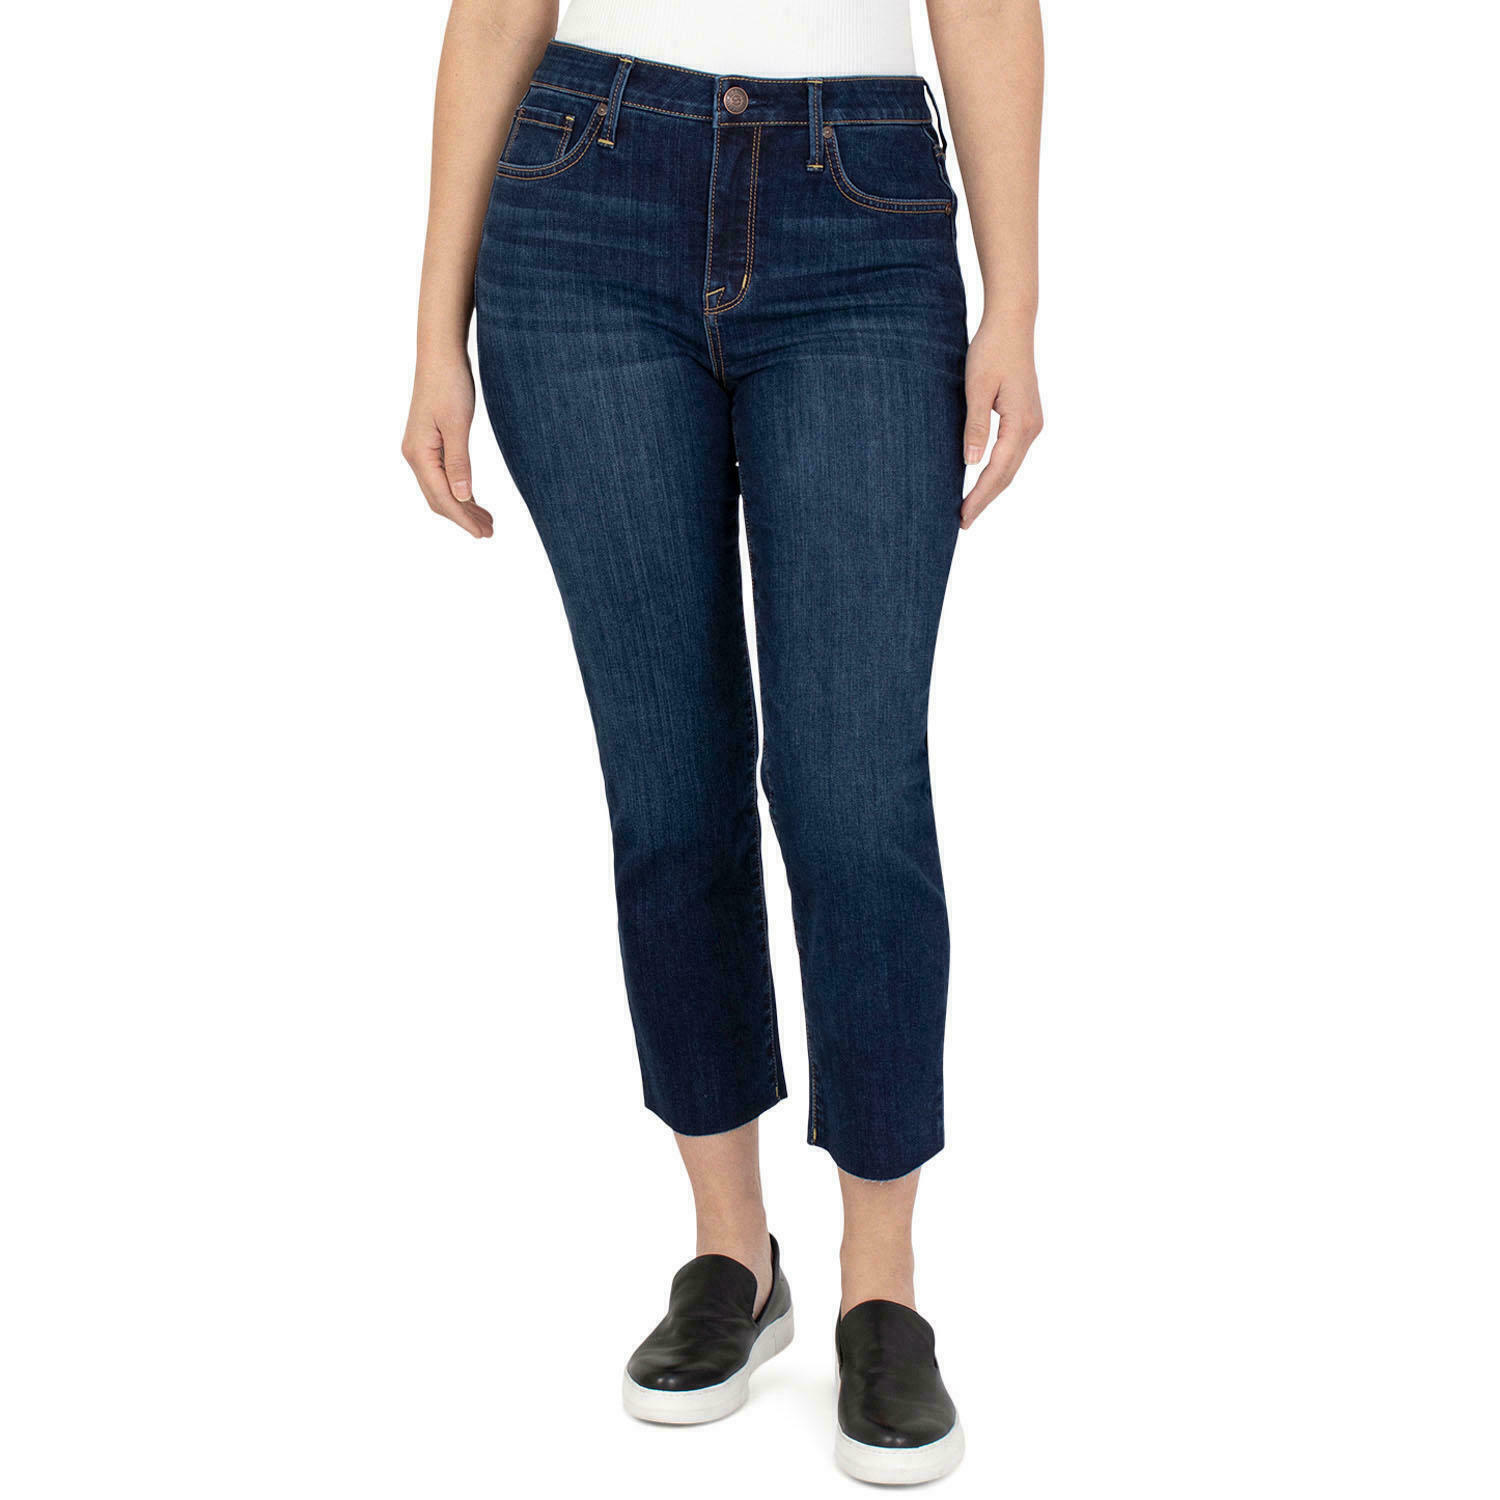 seven7 tower crop straight jeans in london nwt